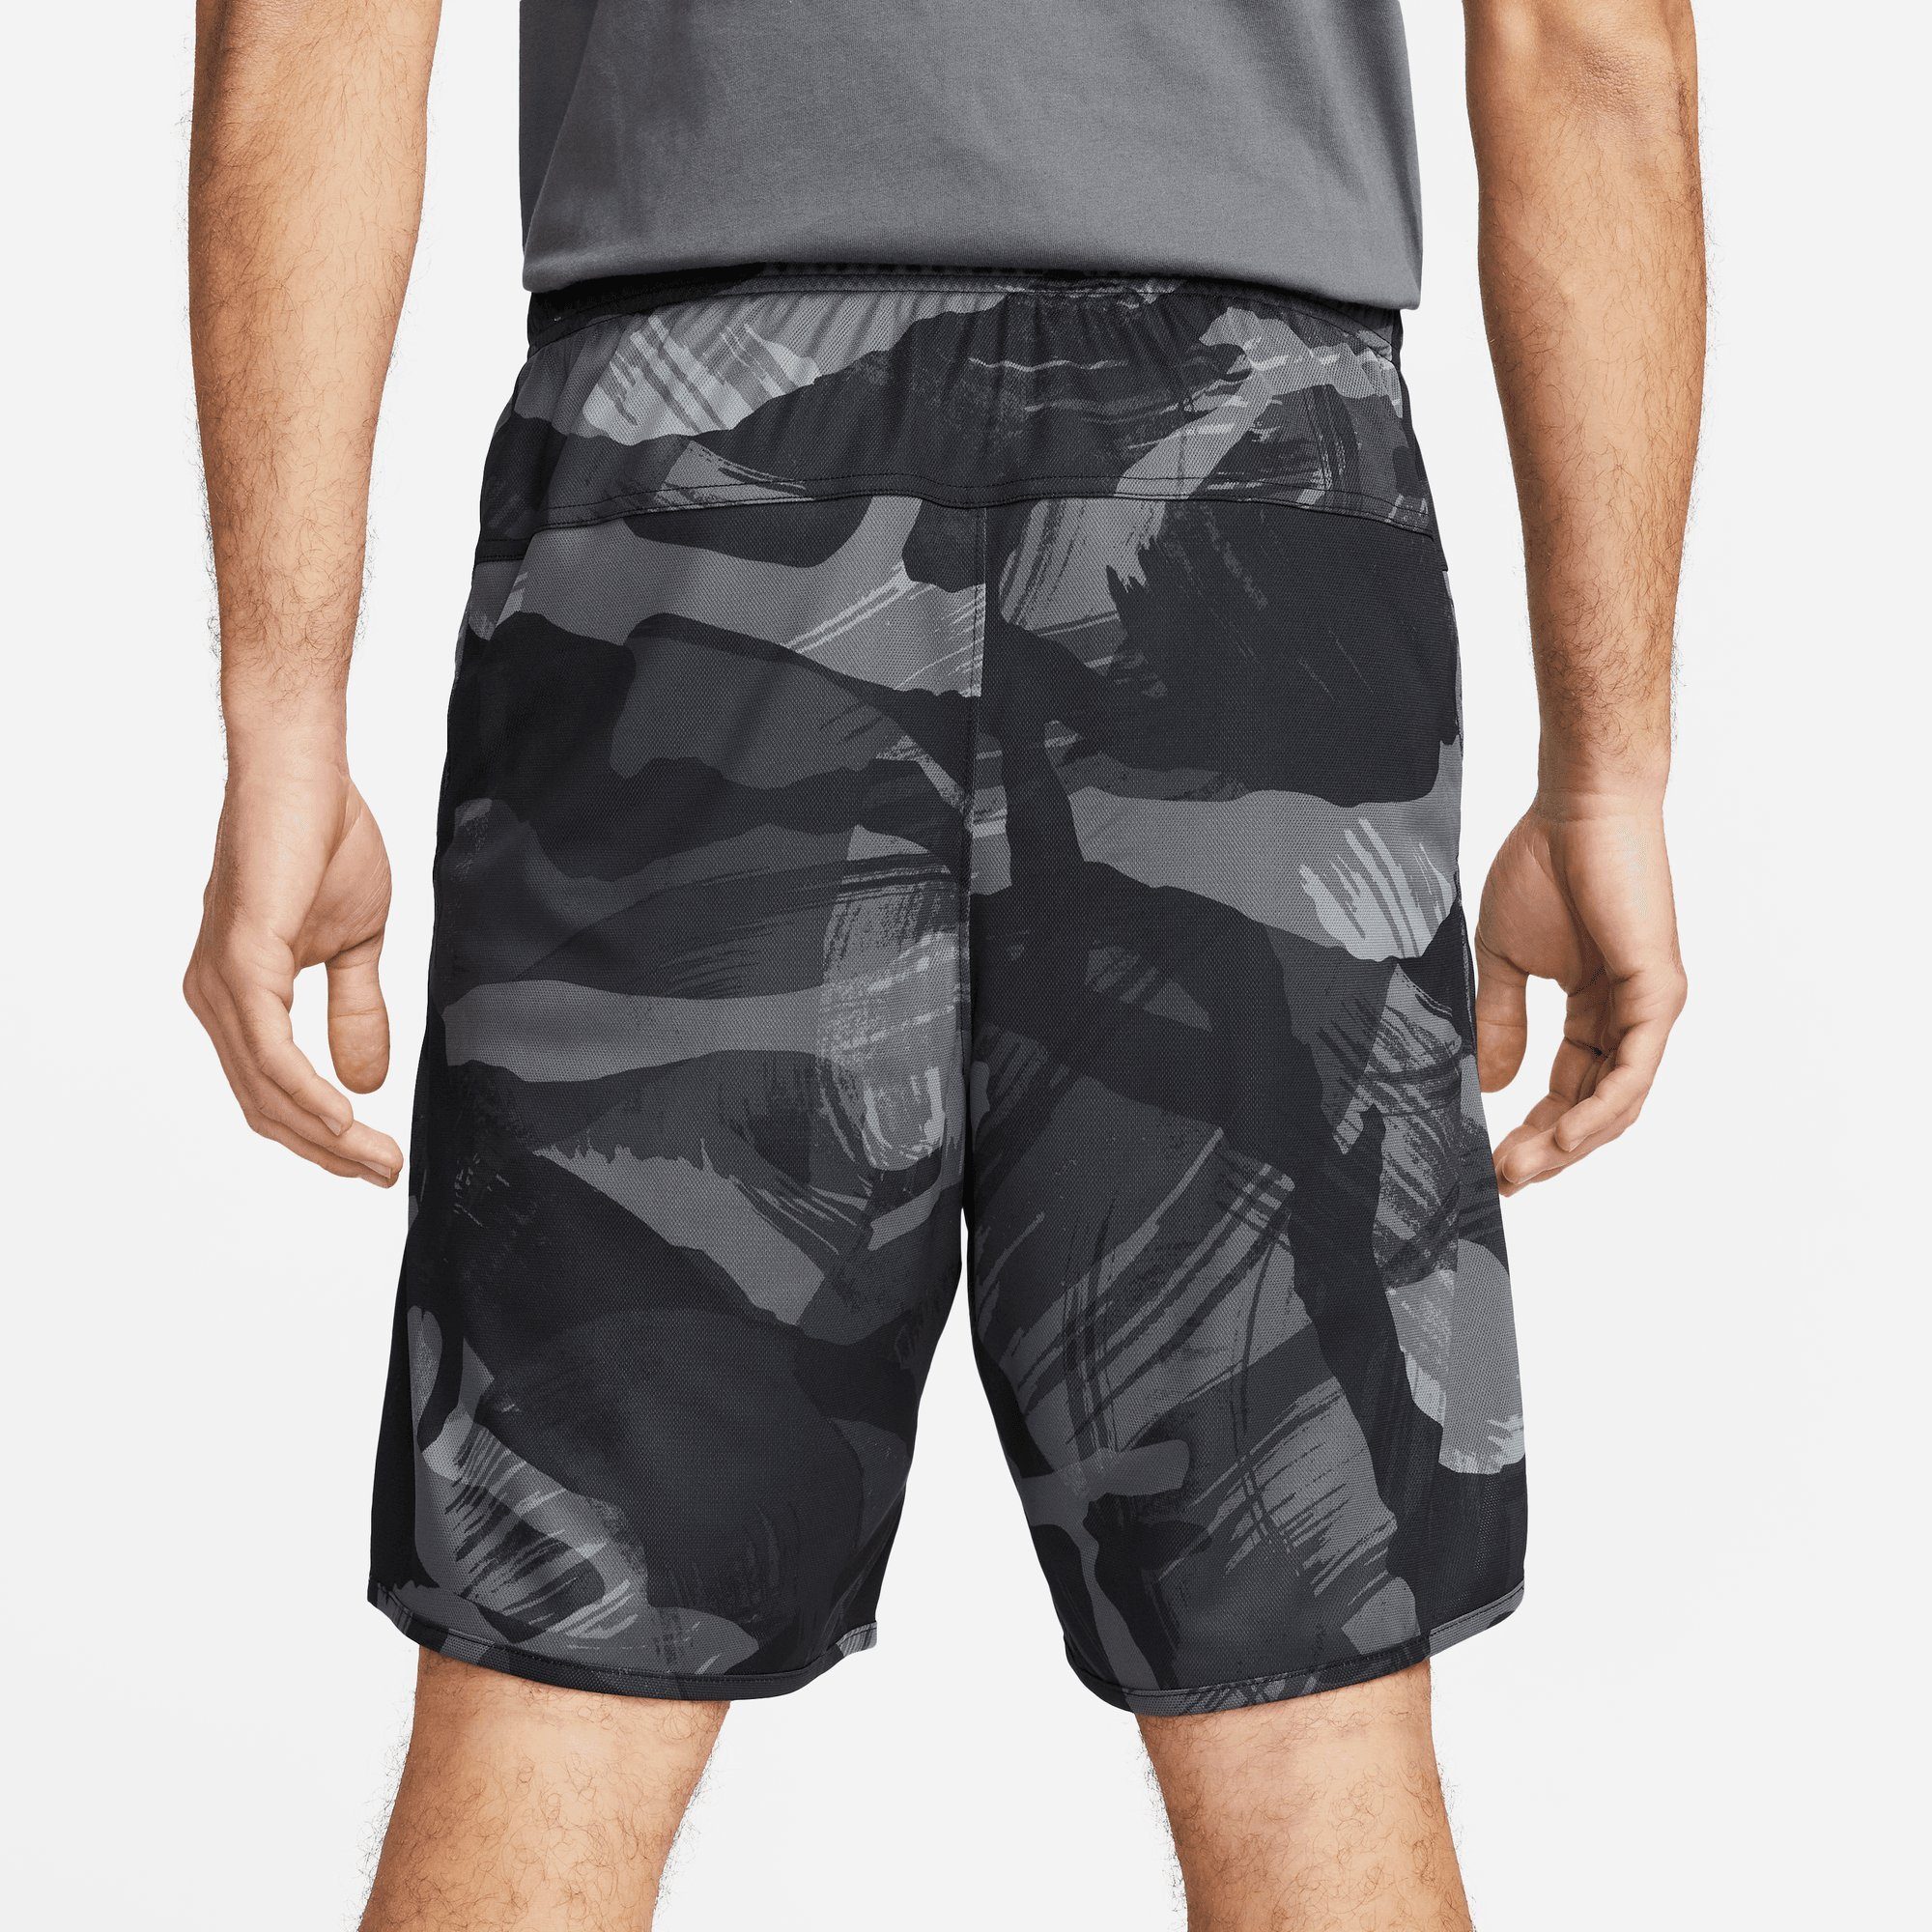 BLACK/GOLD DRI-FIT TOTALITY SHORTS SUEDE/COCONUT Trainingsshorts Nike UNLINED CAMO FITNESS MEN'S " MILK